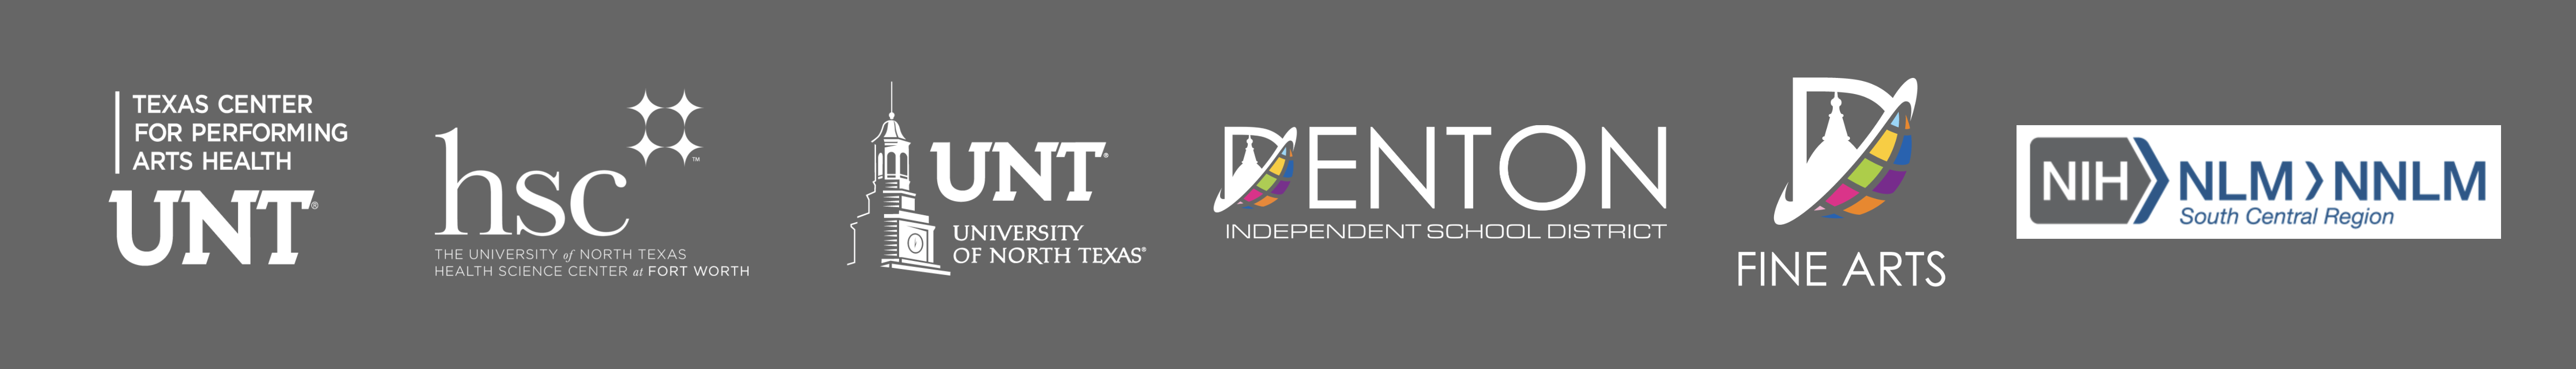 Logos for: Texas Center for Performing Arts Health, University of North Texas Health Science Center, University of North Texas, Texas Academy of Mathematics and Science, Denton ISD, Denton Fine Arts, NIH South Central Region